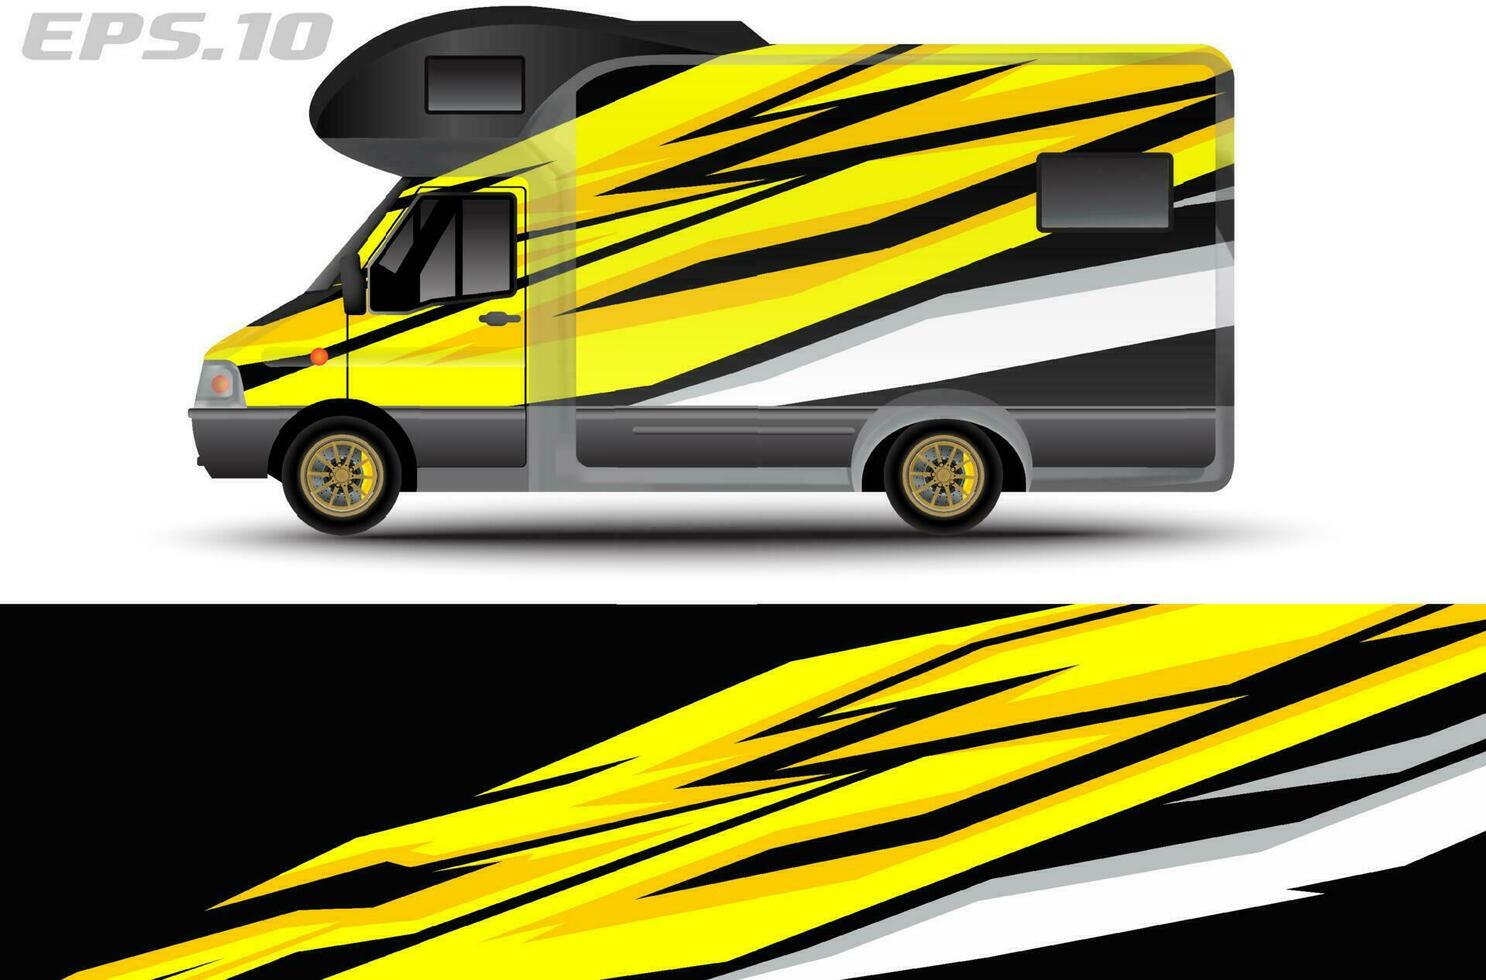 Camper van car wrap design vector for vehicle vinyl stickers and automotive decal livery